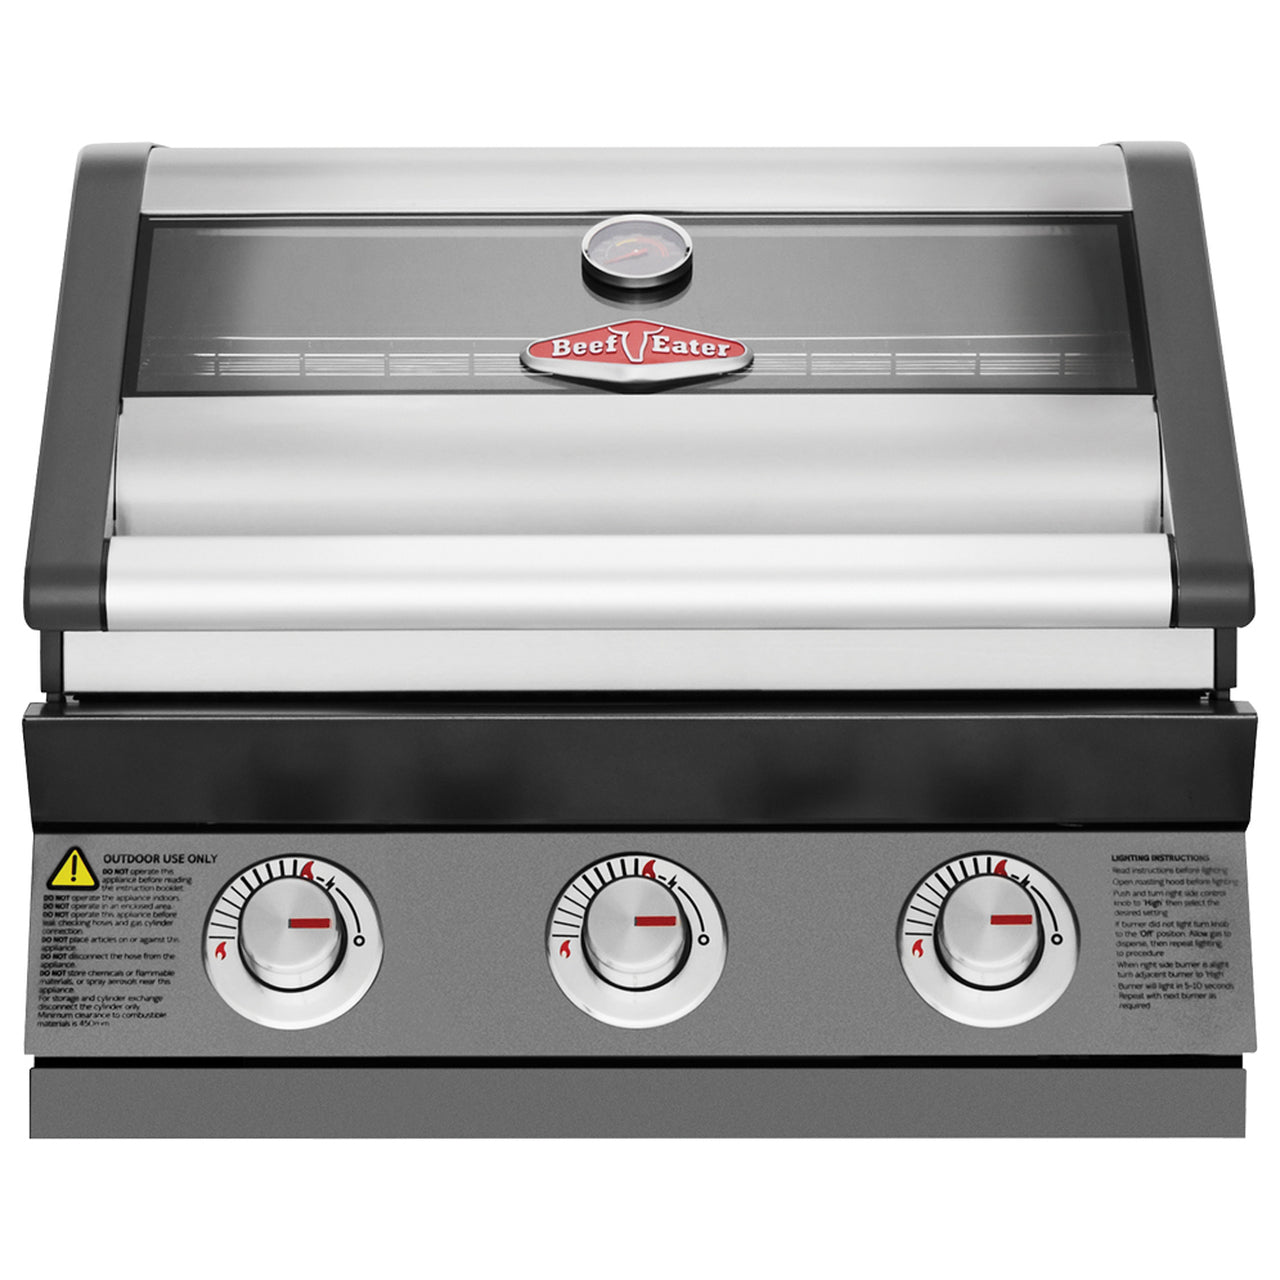 Beefeater 1600e Built-in 3 Burner Gas Bbq